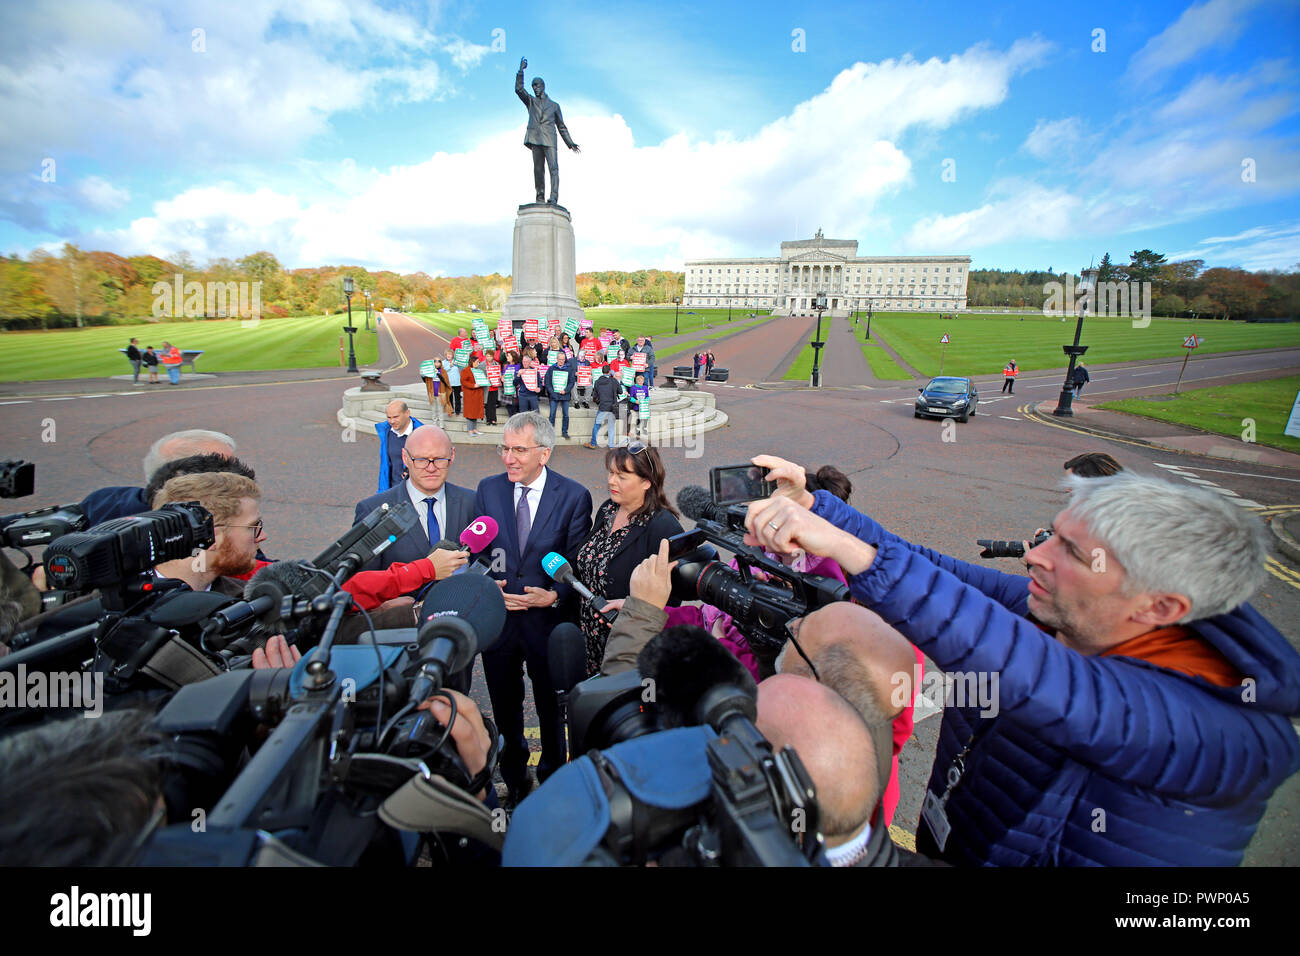 Sinn Féin MPs Paul Maskey and Michelle Gildernew and MLA Máirtín Ó Muilleoir speak to the media outside Stormont Belfast, Wednesday 17th, October, 2018, Northern Ireland, North of Ireland. Sinn Fein MLAs and MPs joined a Brexit protest at Stormont and at Queen's University Belfast comes before Theresa May this evenings visit to Brussels to speak to EU leaders as she battles to keep hopes of a Brexit deal alive. Expectations of a breakthrough are low, with talks deadlocked over the Irish border issue.EU leaders say it is up to the Stock Photo